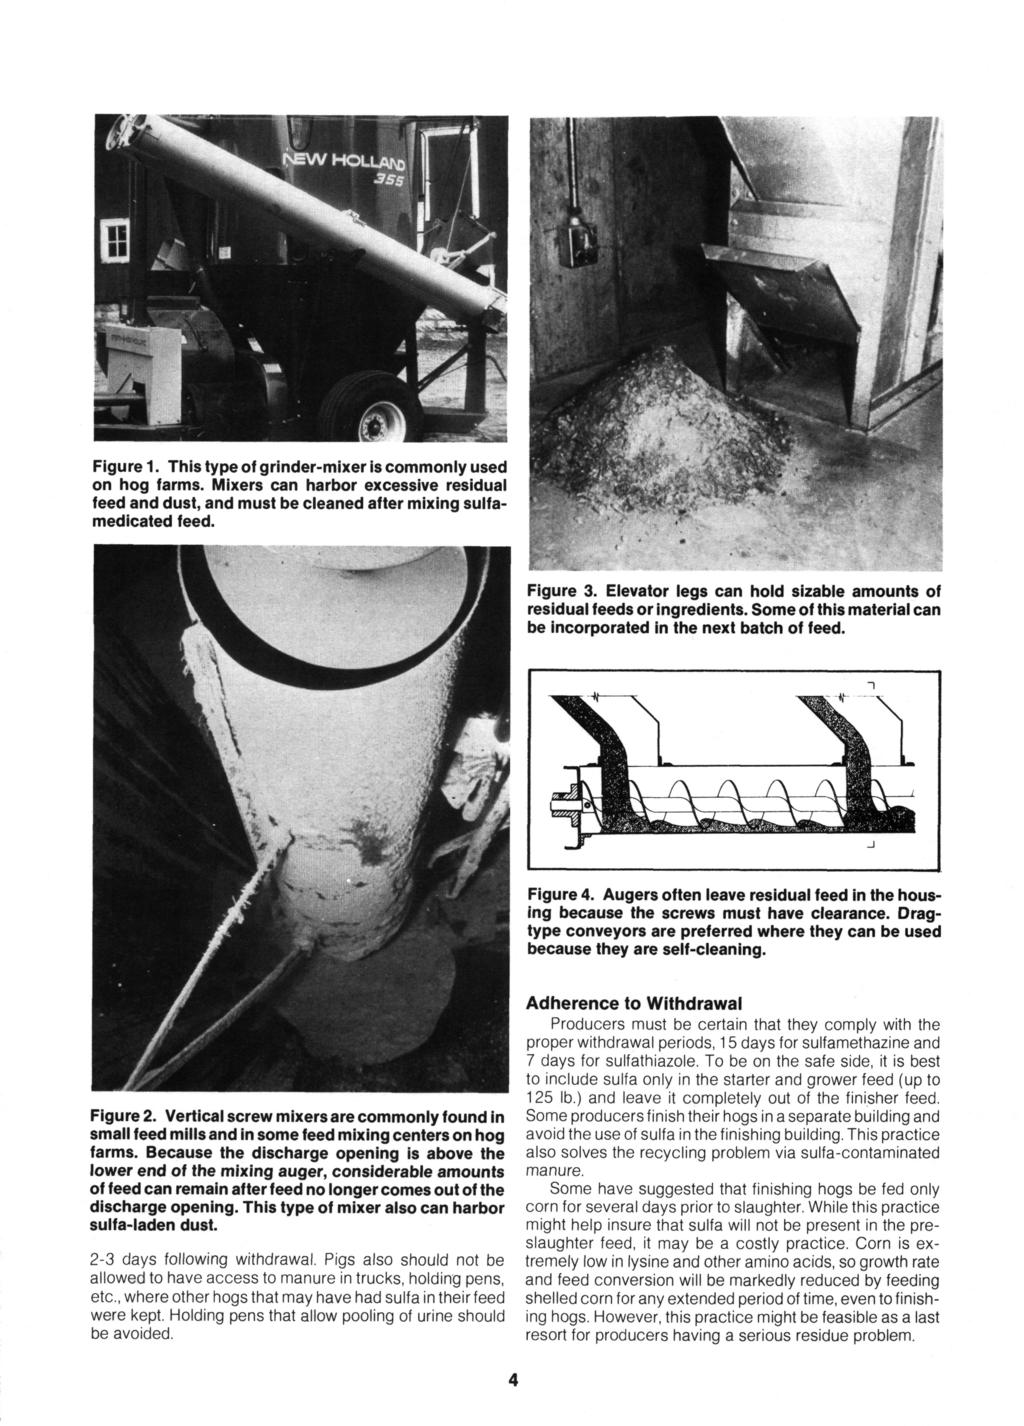 Figure 1. This type of grinder-mixer is commonly used on hog farms. Mixers can harbor excessive residual feed and dust, and must be cleaned after mixing sulfamedicated feed. Figure 3.